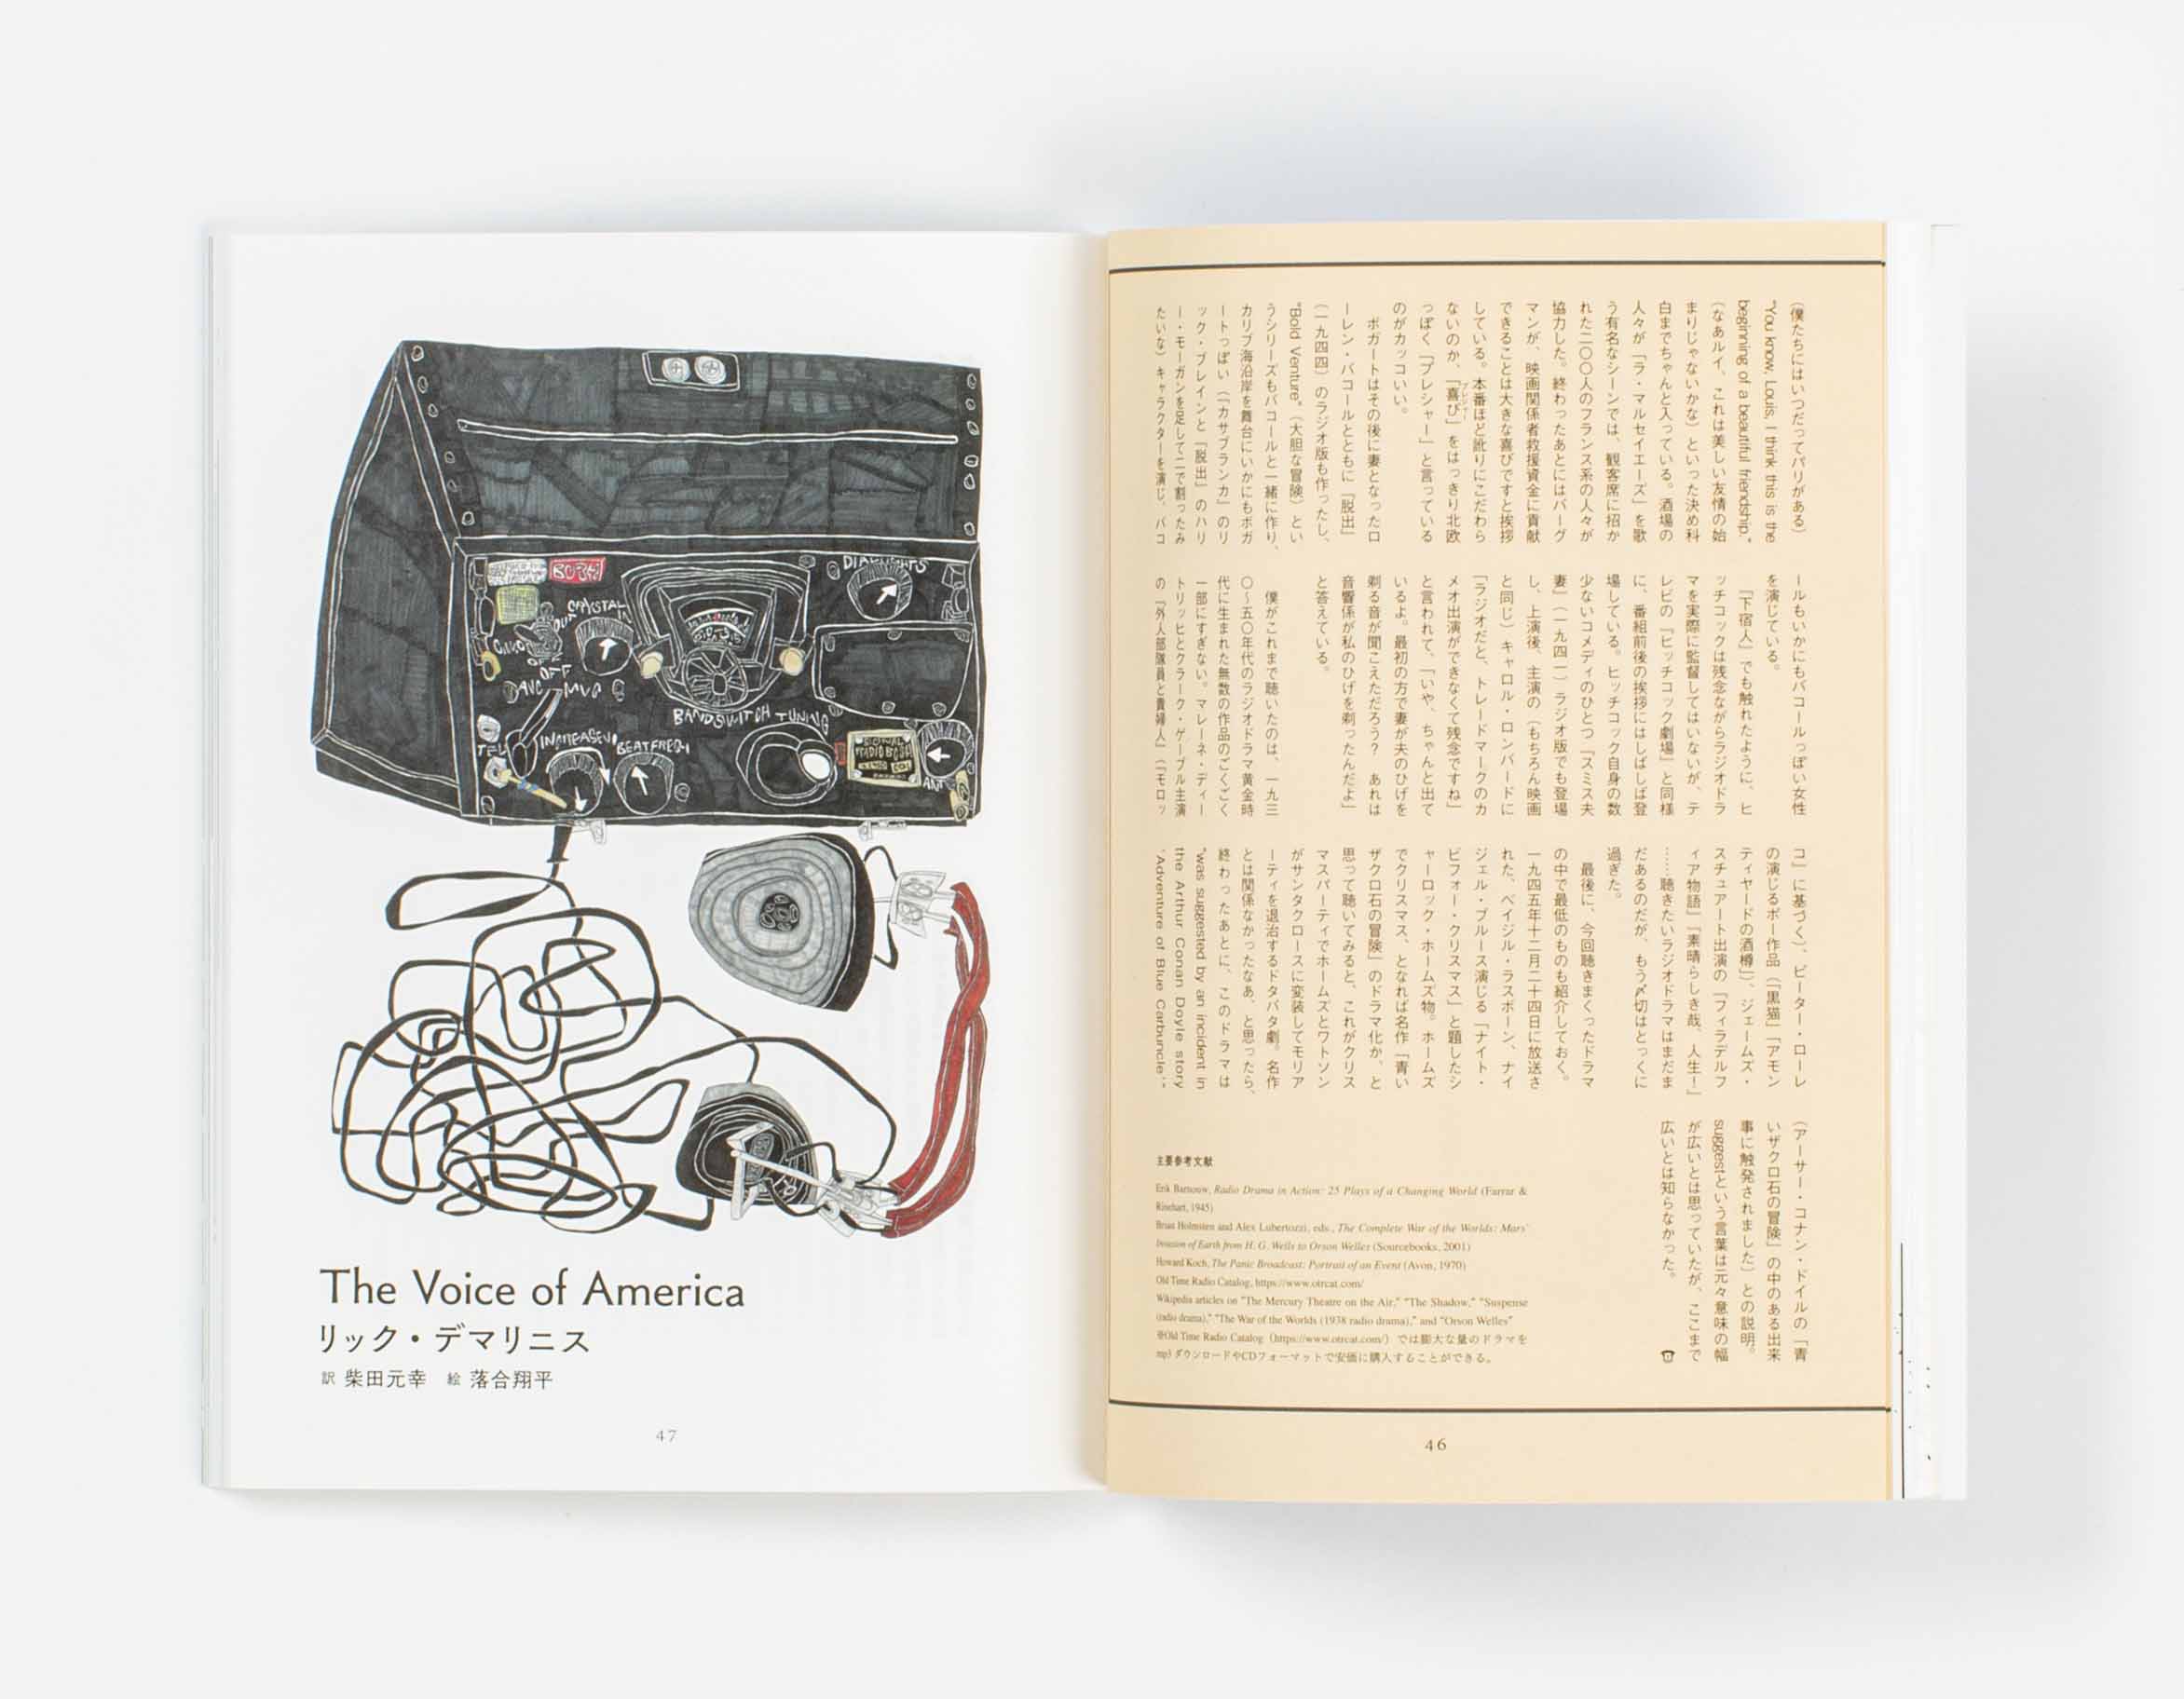 MONKEY vol.27 ”The Voice of America” リック・デマリニス